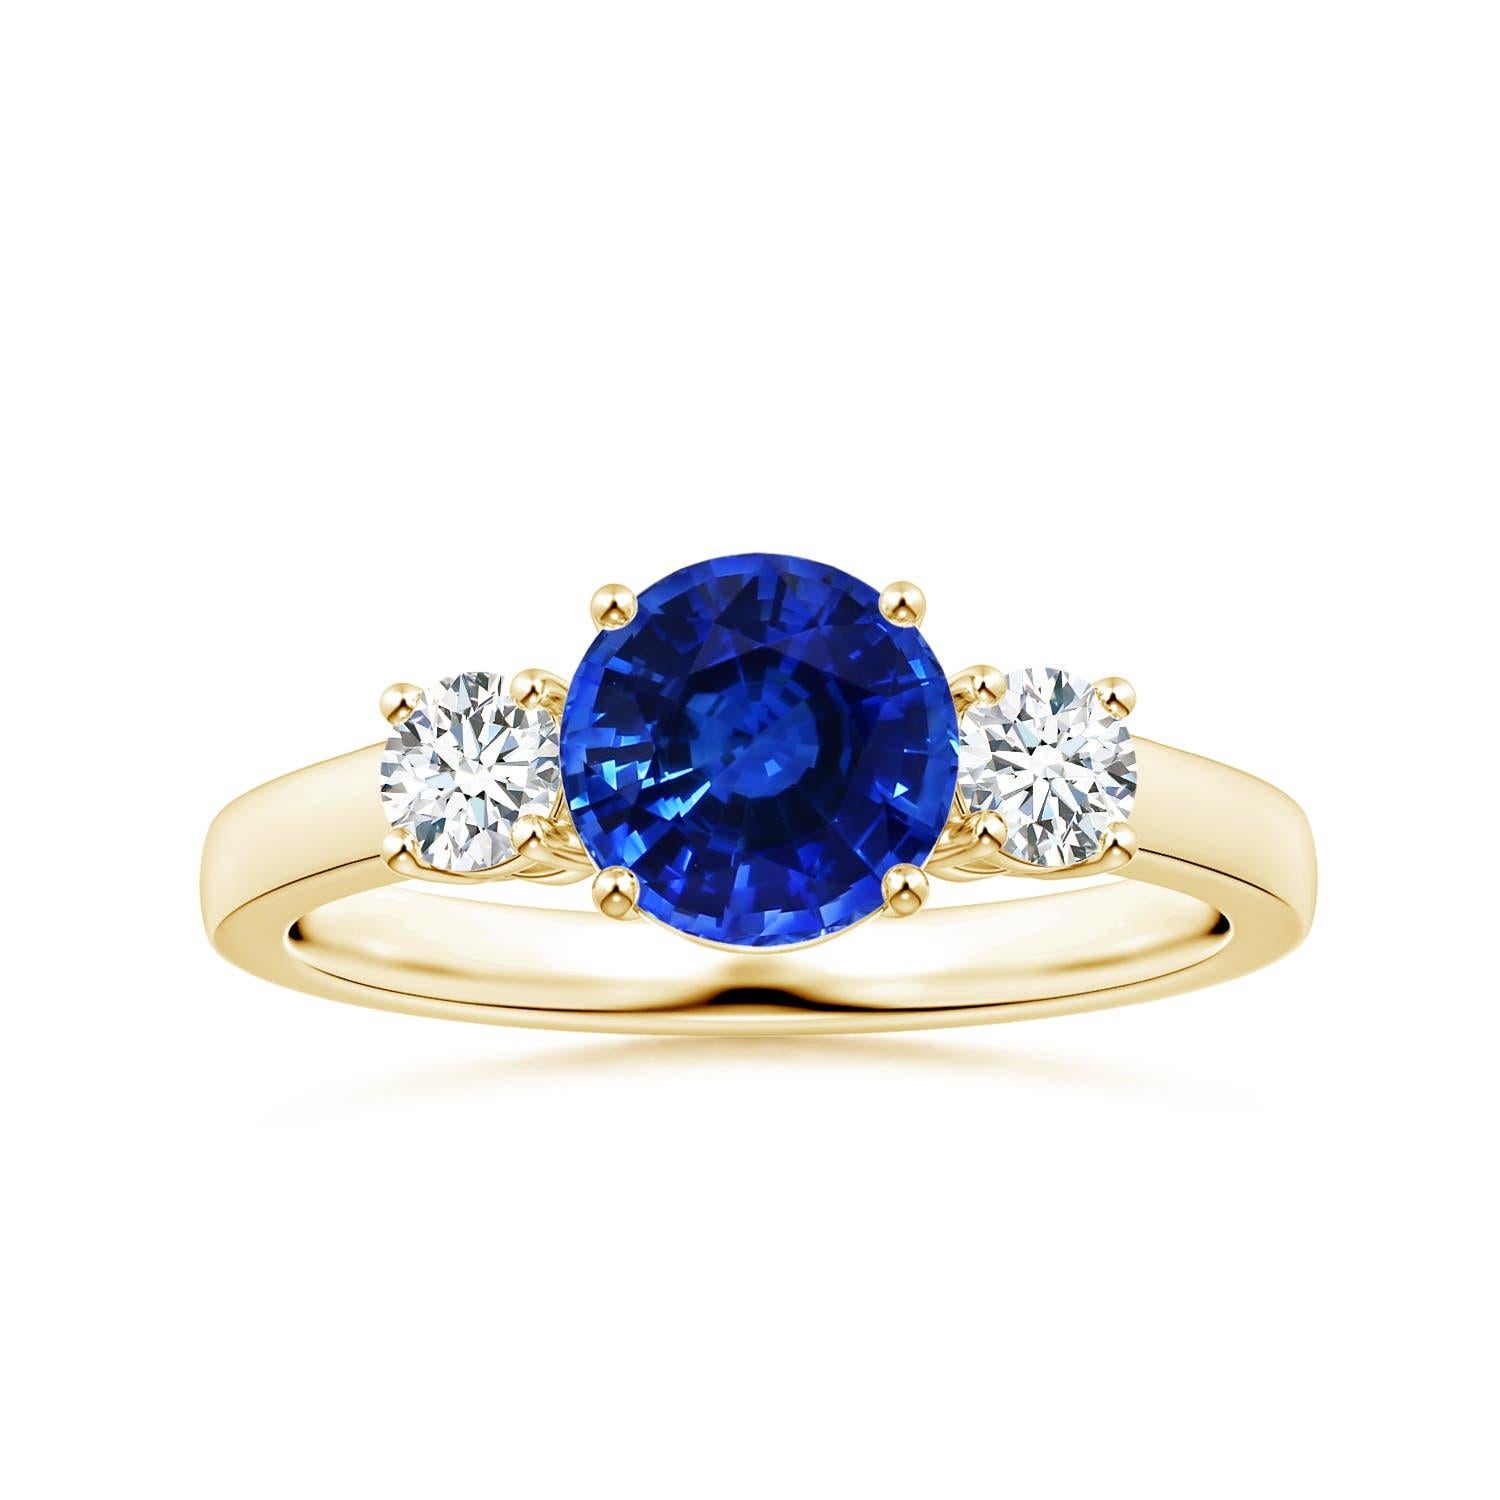 For Sale:  ANGARA Three stone GIA Certified Blue Sapphire Ring in Yellow Gold with Diamonds